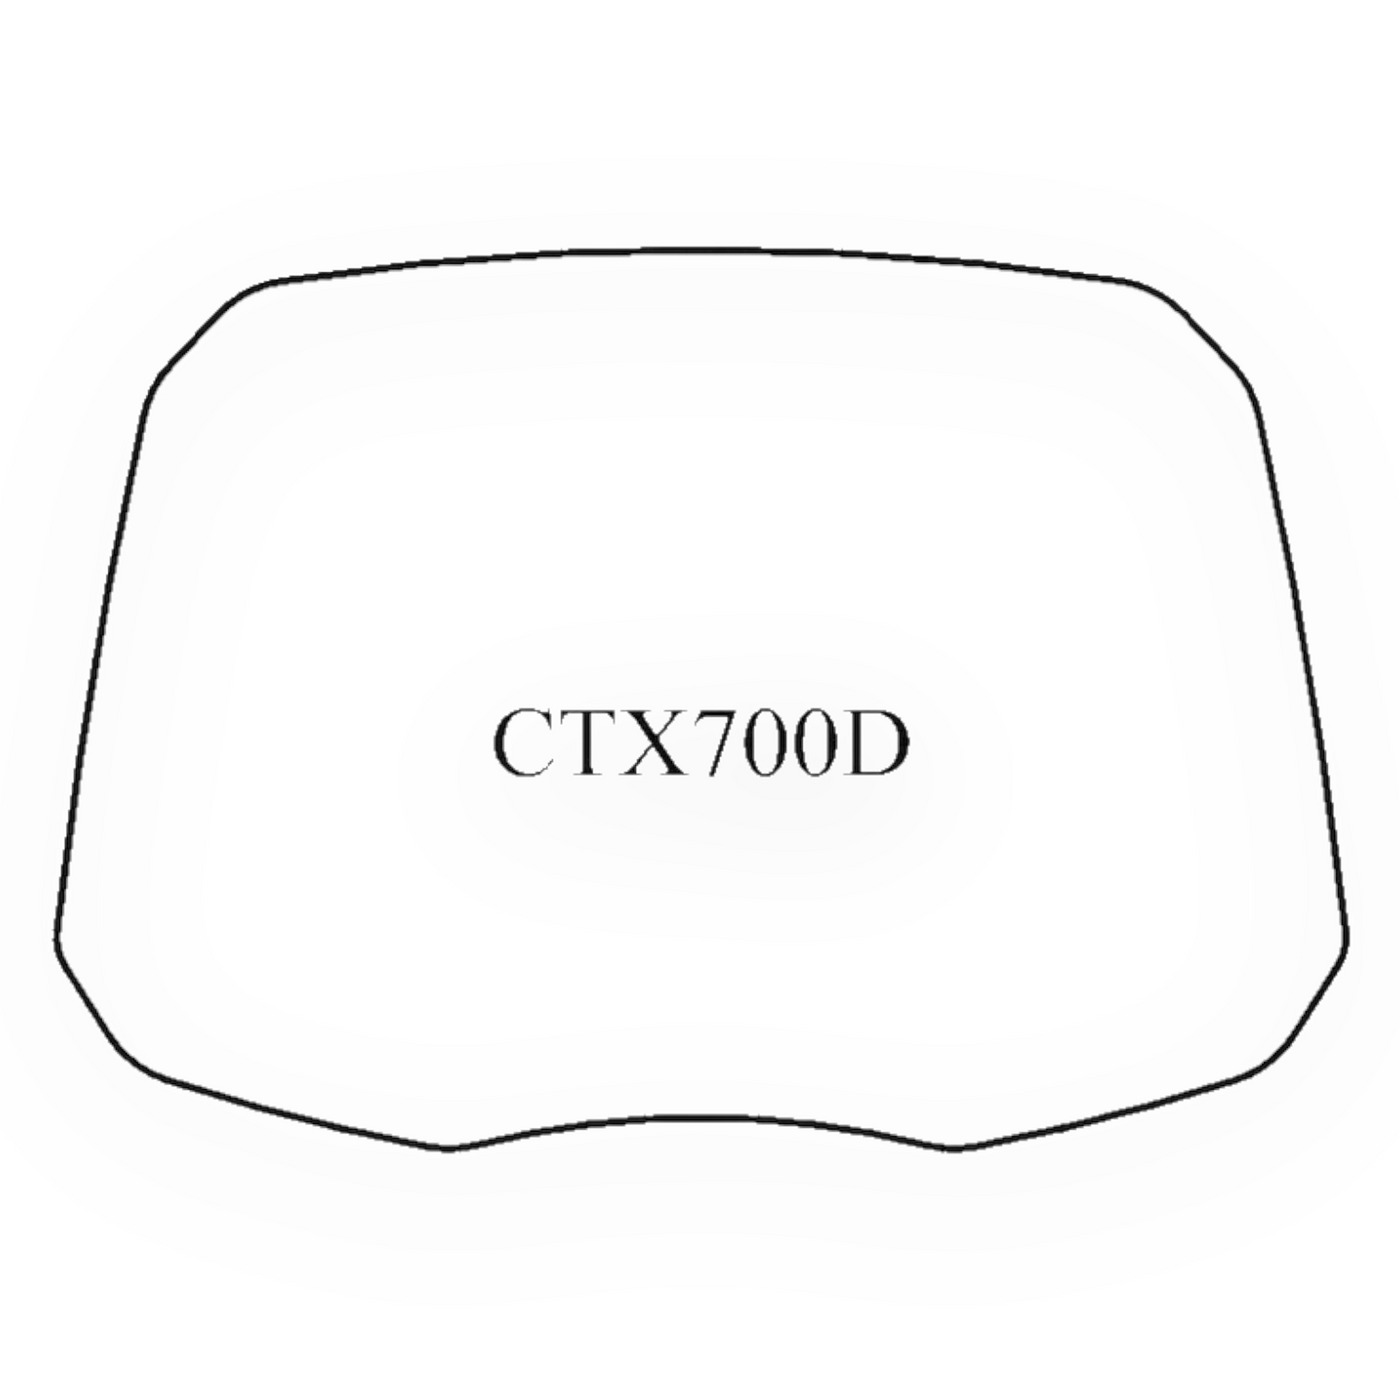 Windshield ONLY - Replacement Windshield for Madstad System for Honda CTX700D